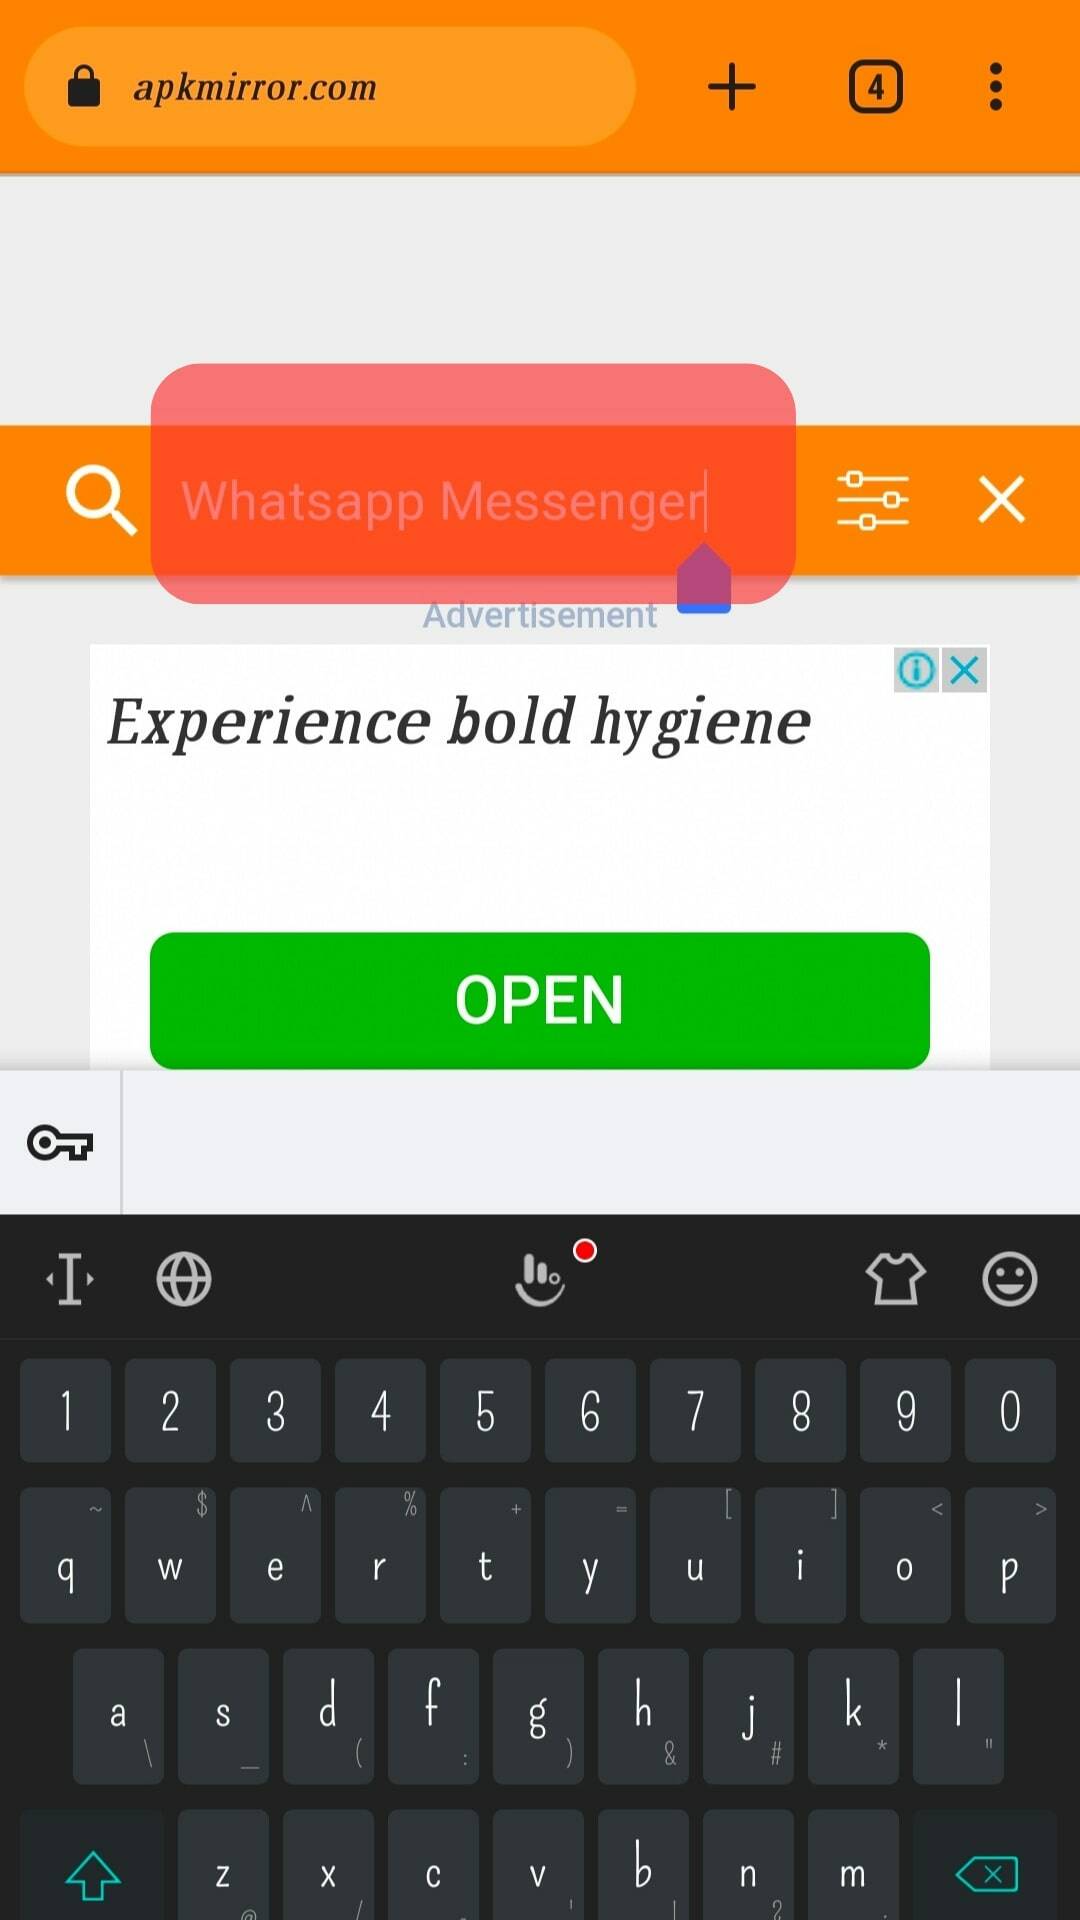 Search For Whatsapp Messenger